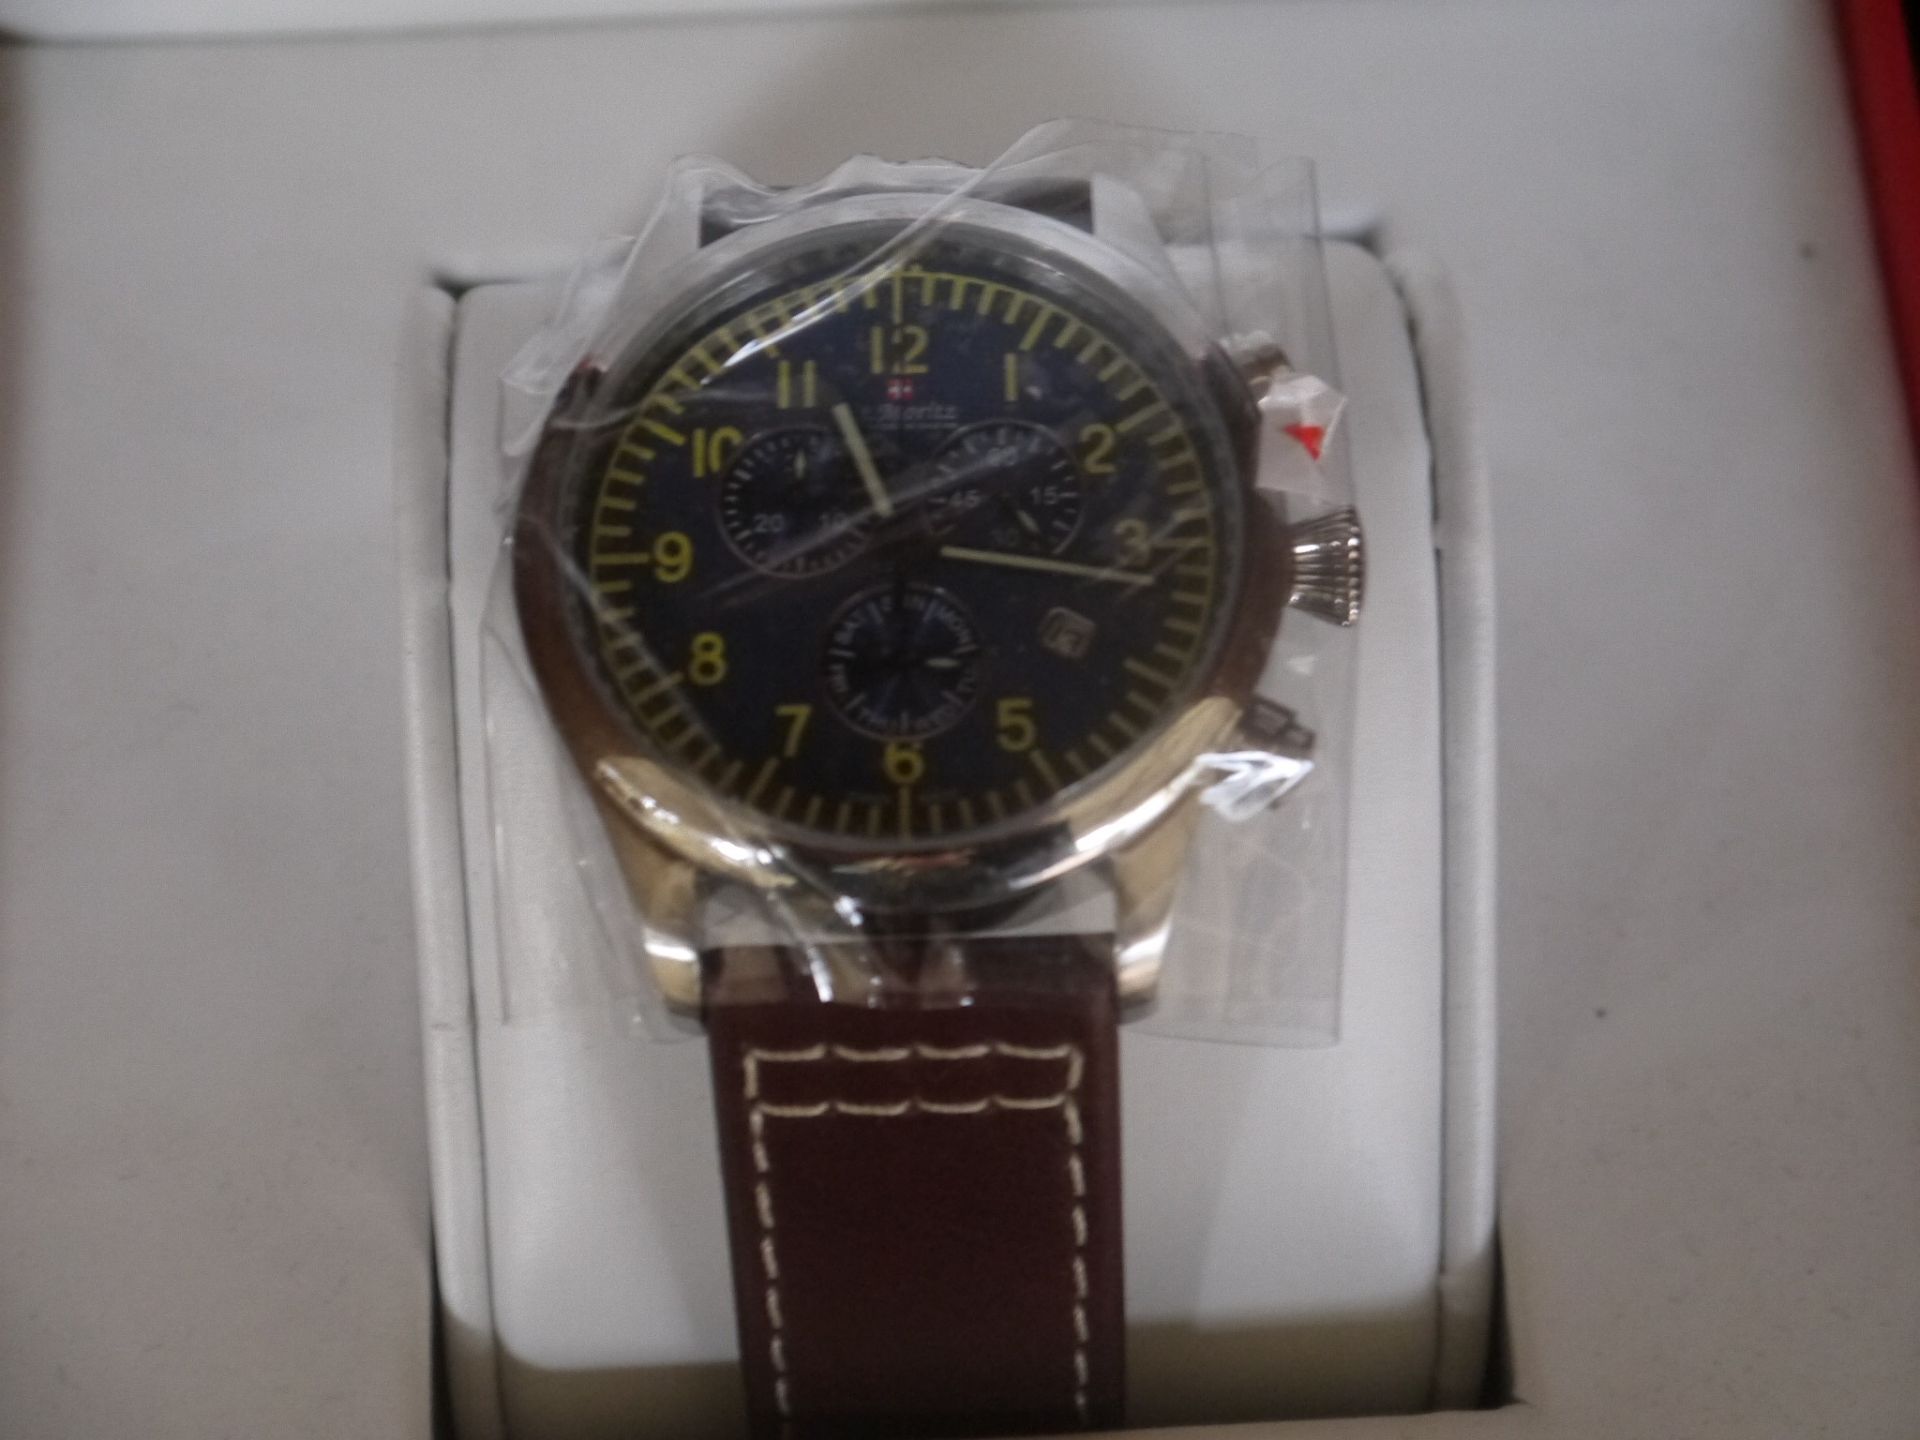 St Moritz of Switzerland Brown Leather strapped Chronograph watch, new and ticking in Presentation